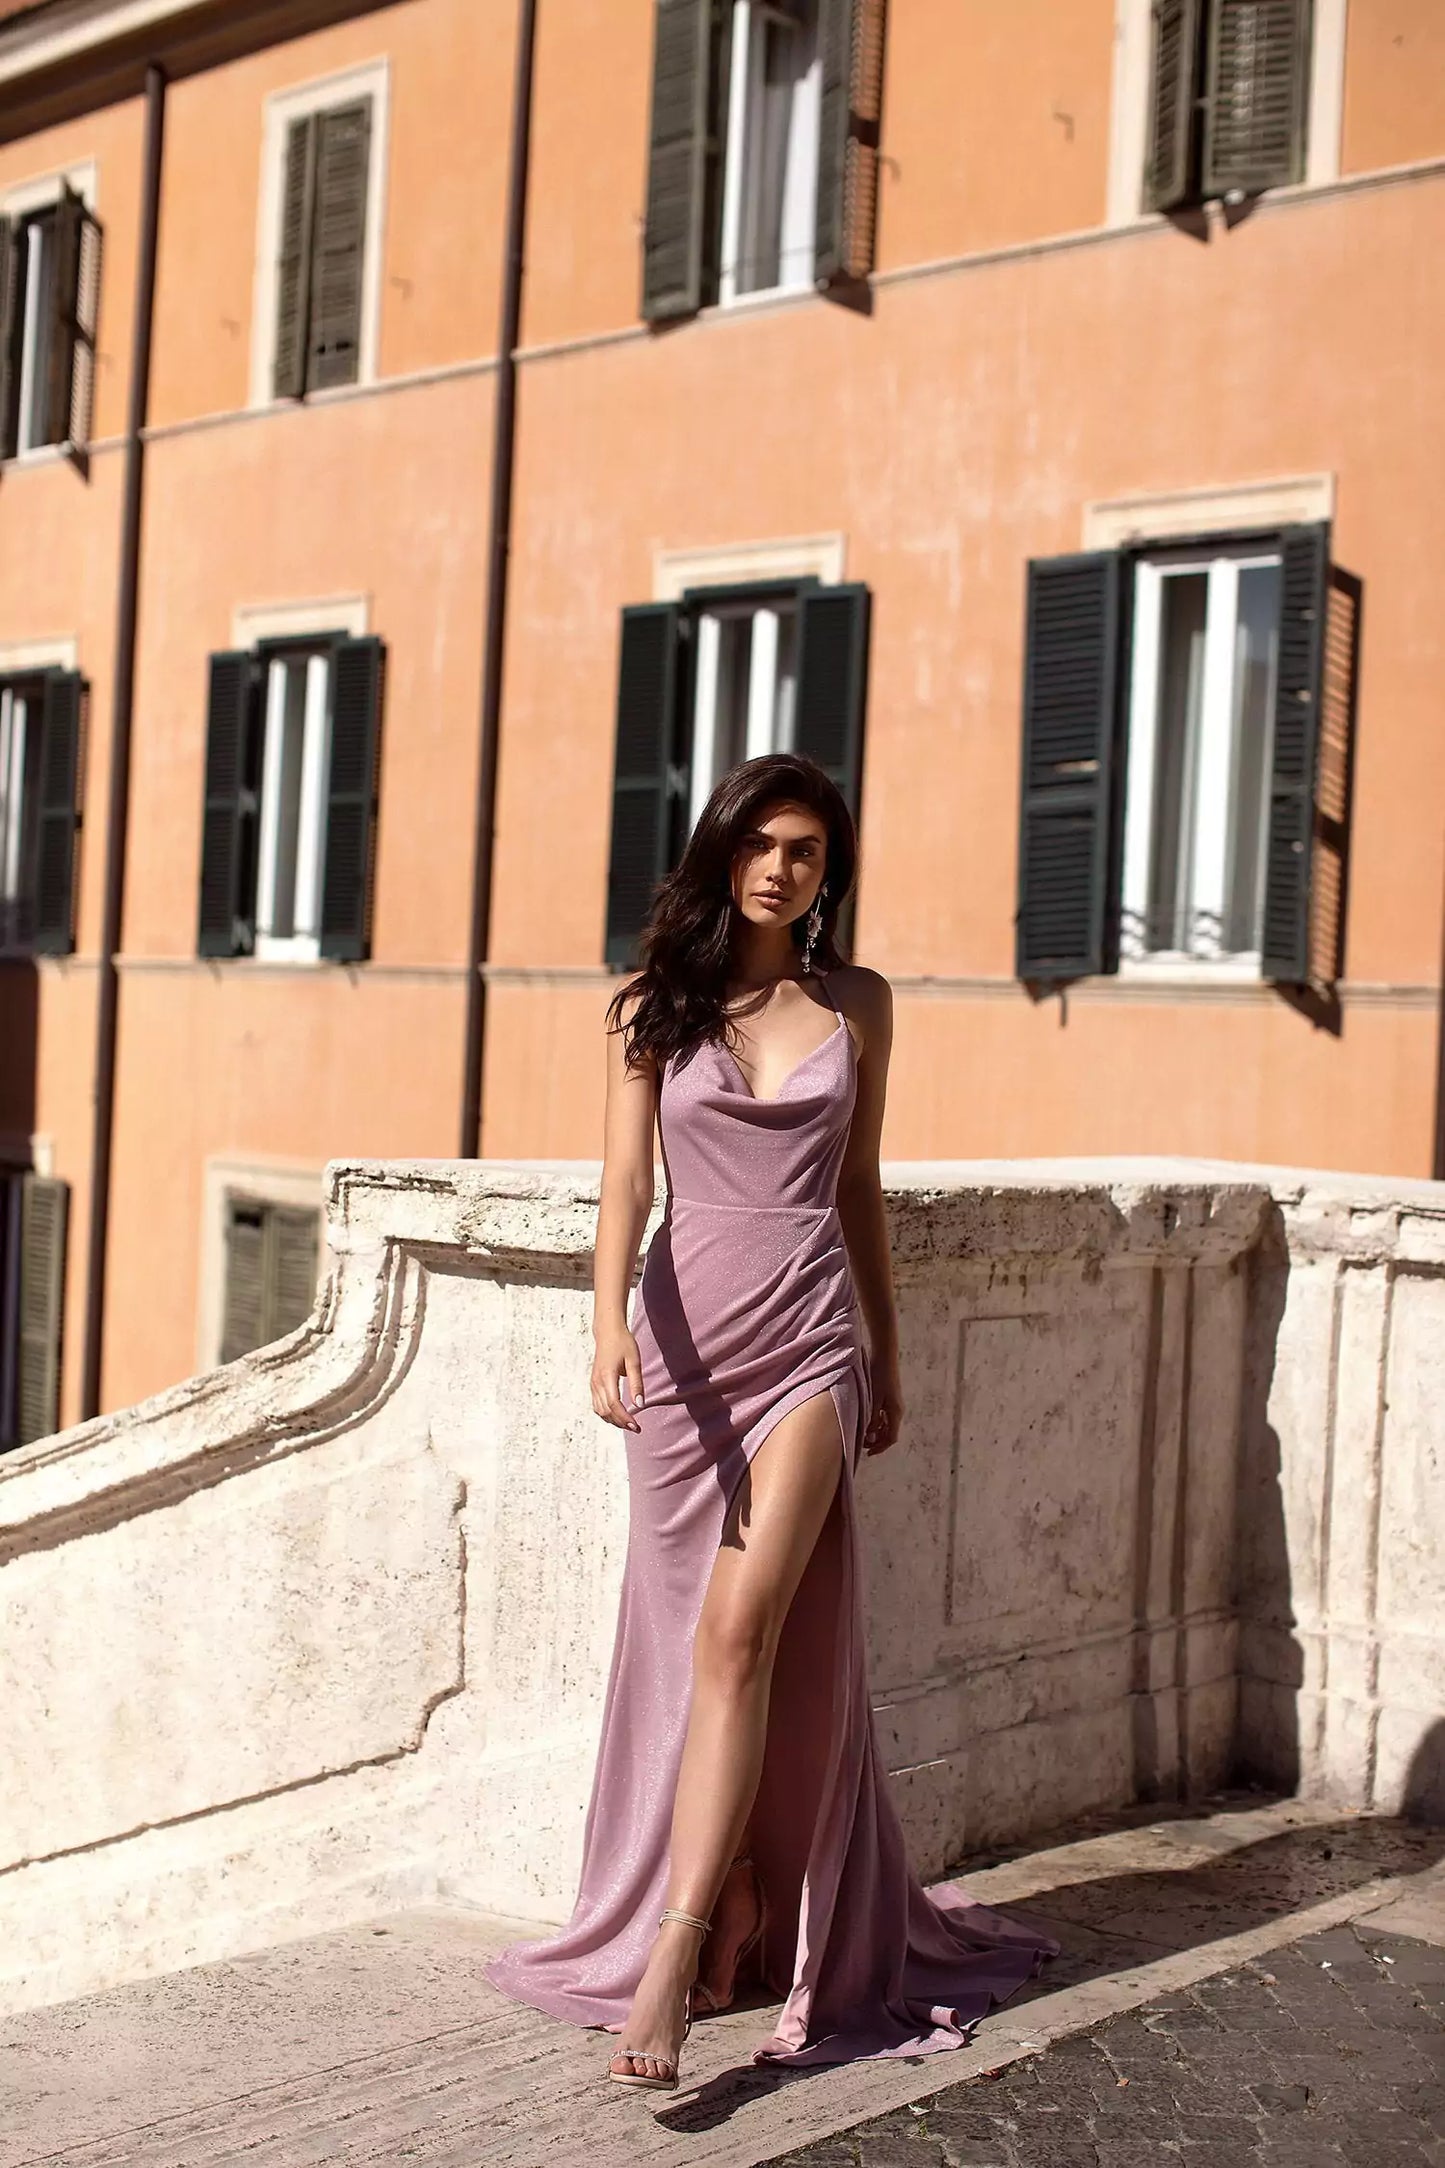 A woman in a purple dress posing in front of a building.